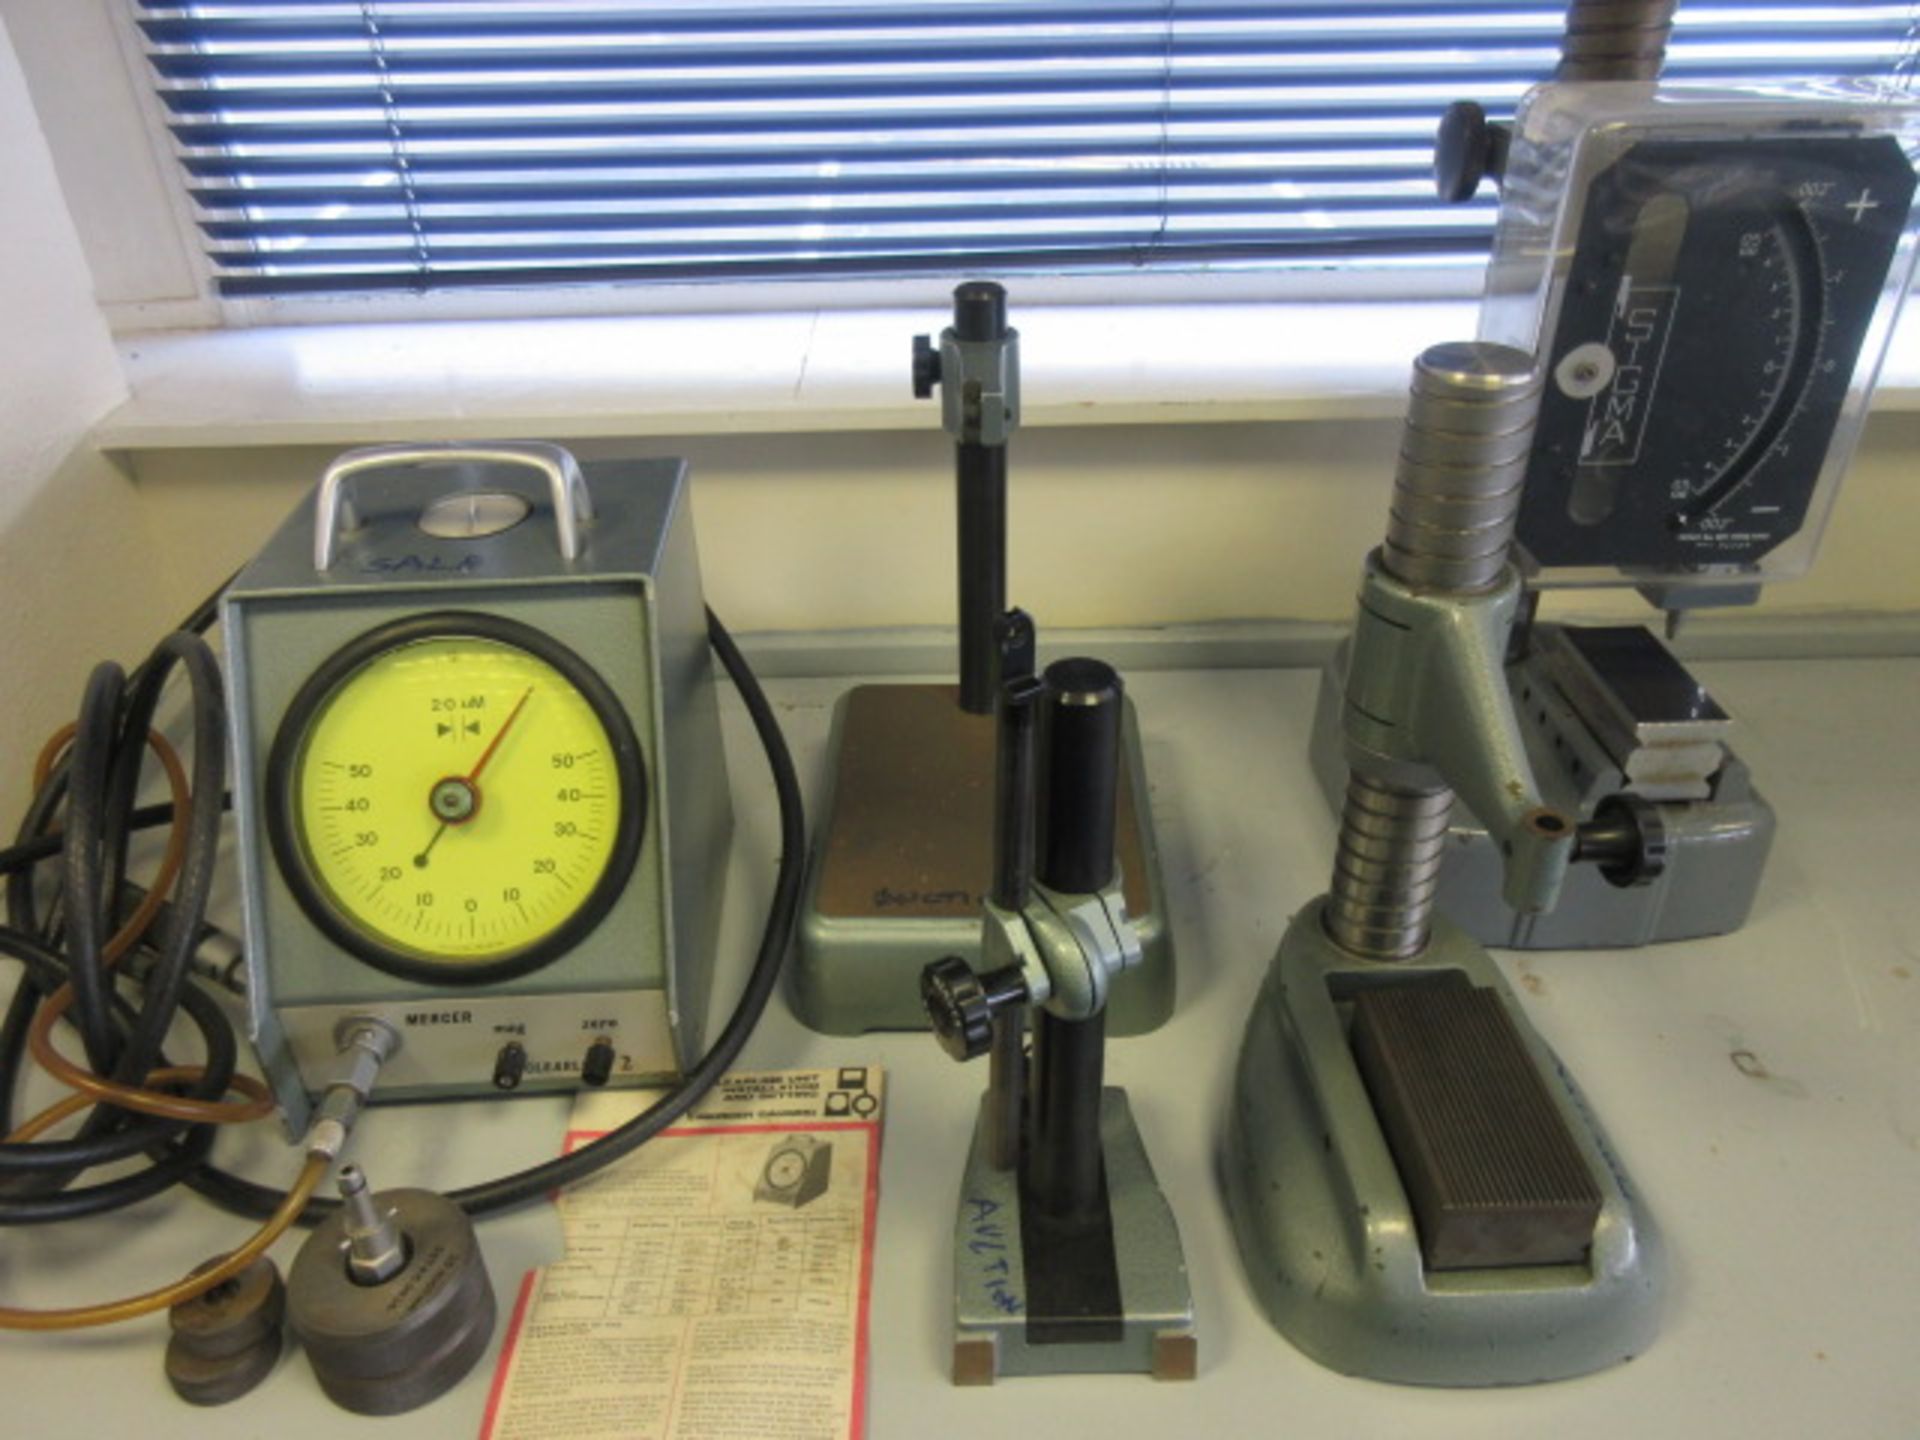 THREE GAUGE STANDS, A SIGMA IMPERIAL/METRIC COMPARITOR AND A MERCER CLEARLINE 2 AIR BORE GAUGE